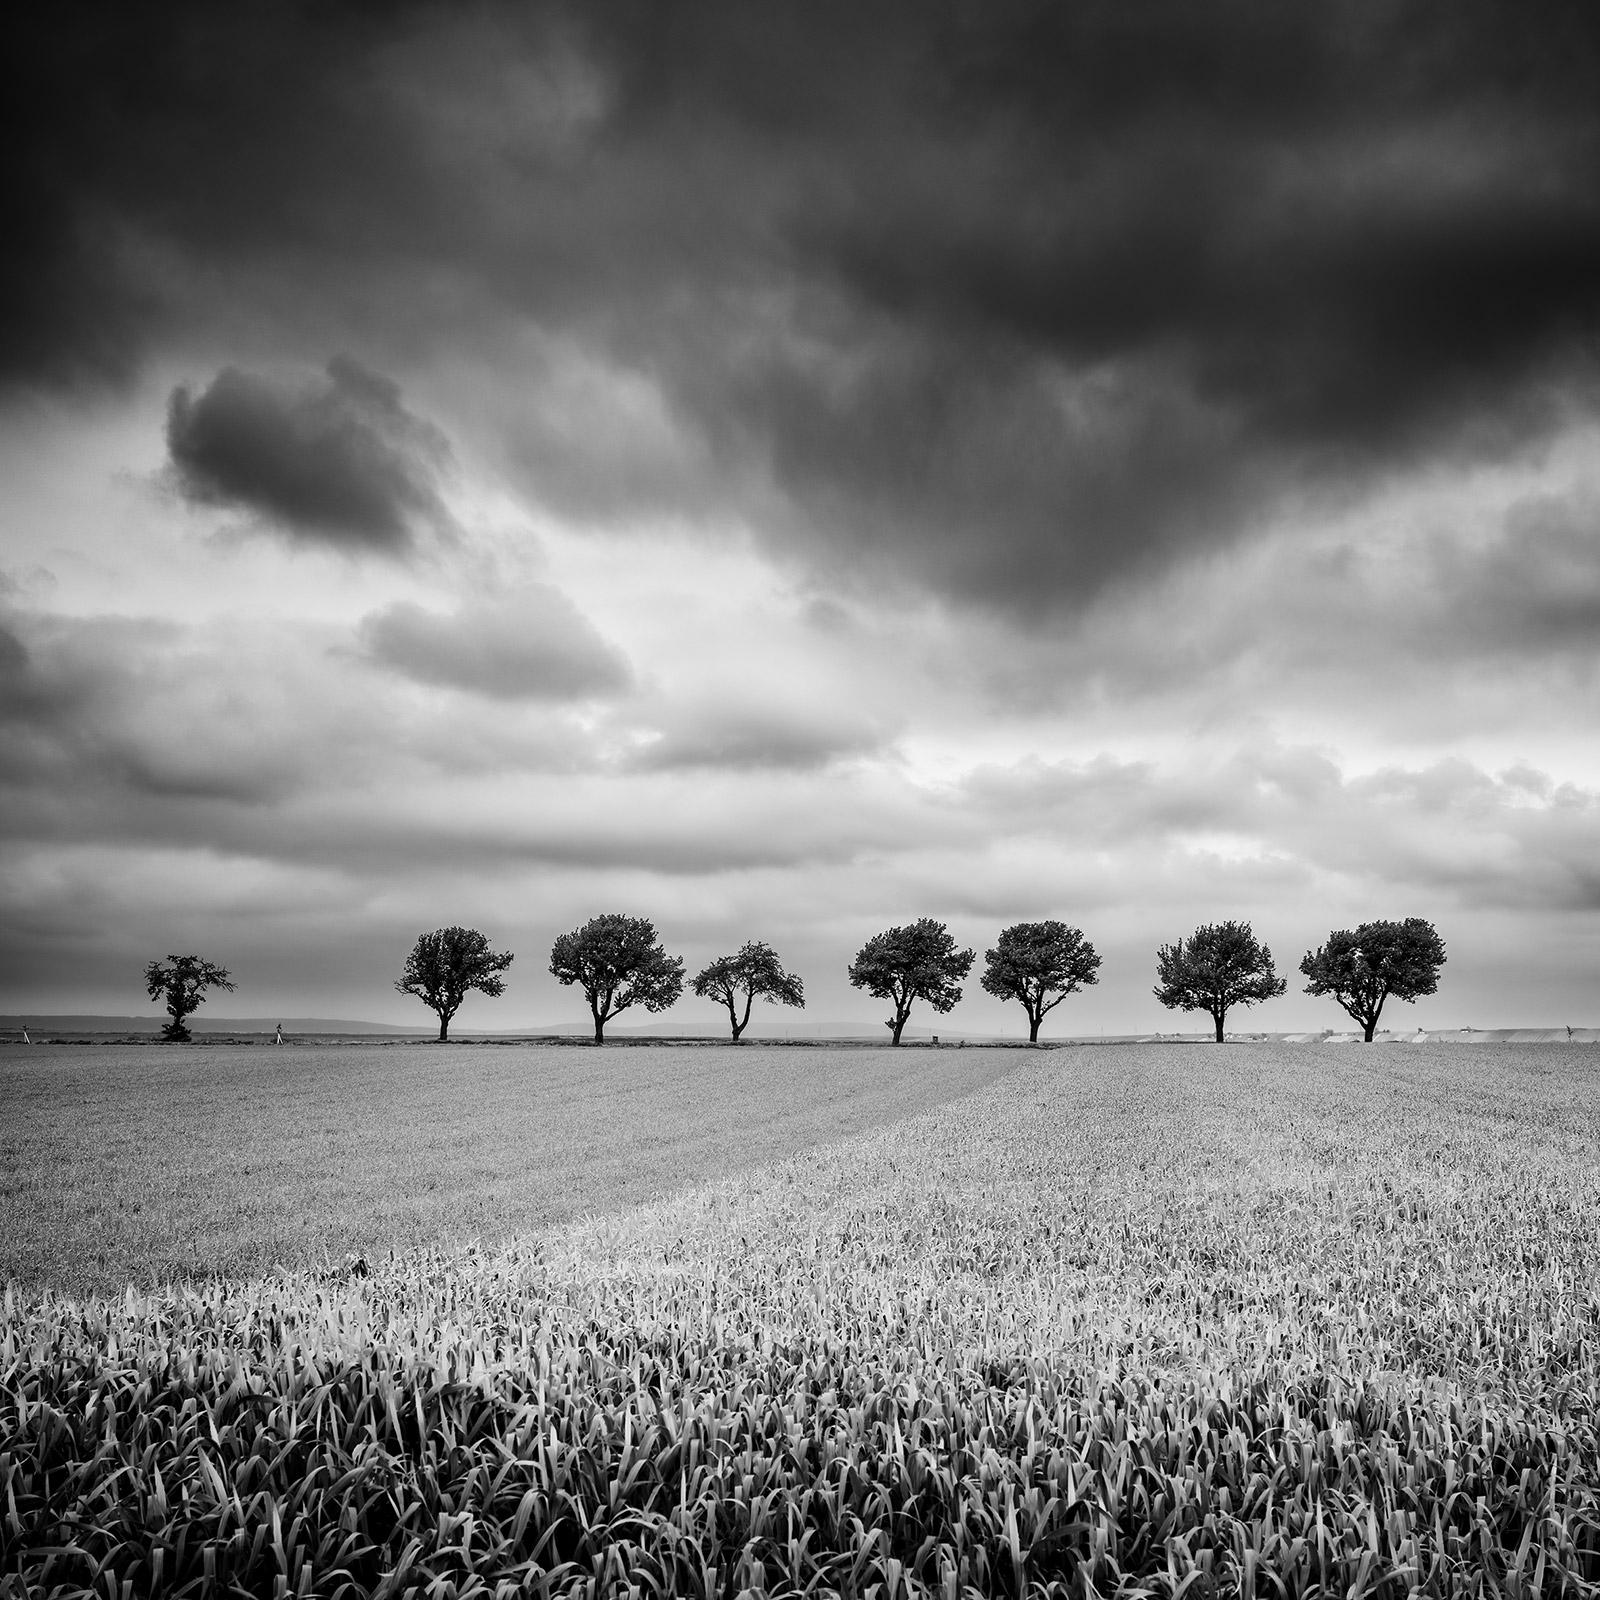 Gerald Berghammer Landscape Print - Eleven Cherry Trees, stormy Clouds, black and white, landscape, art photography